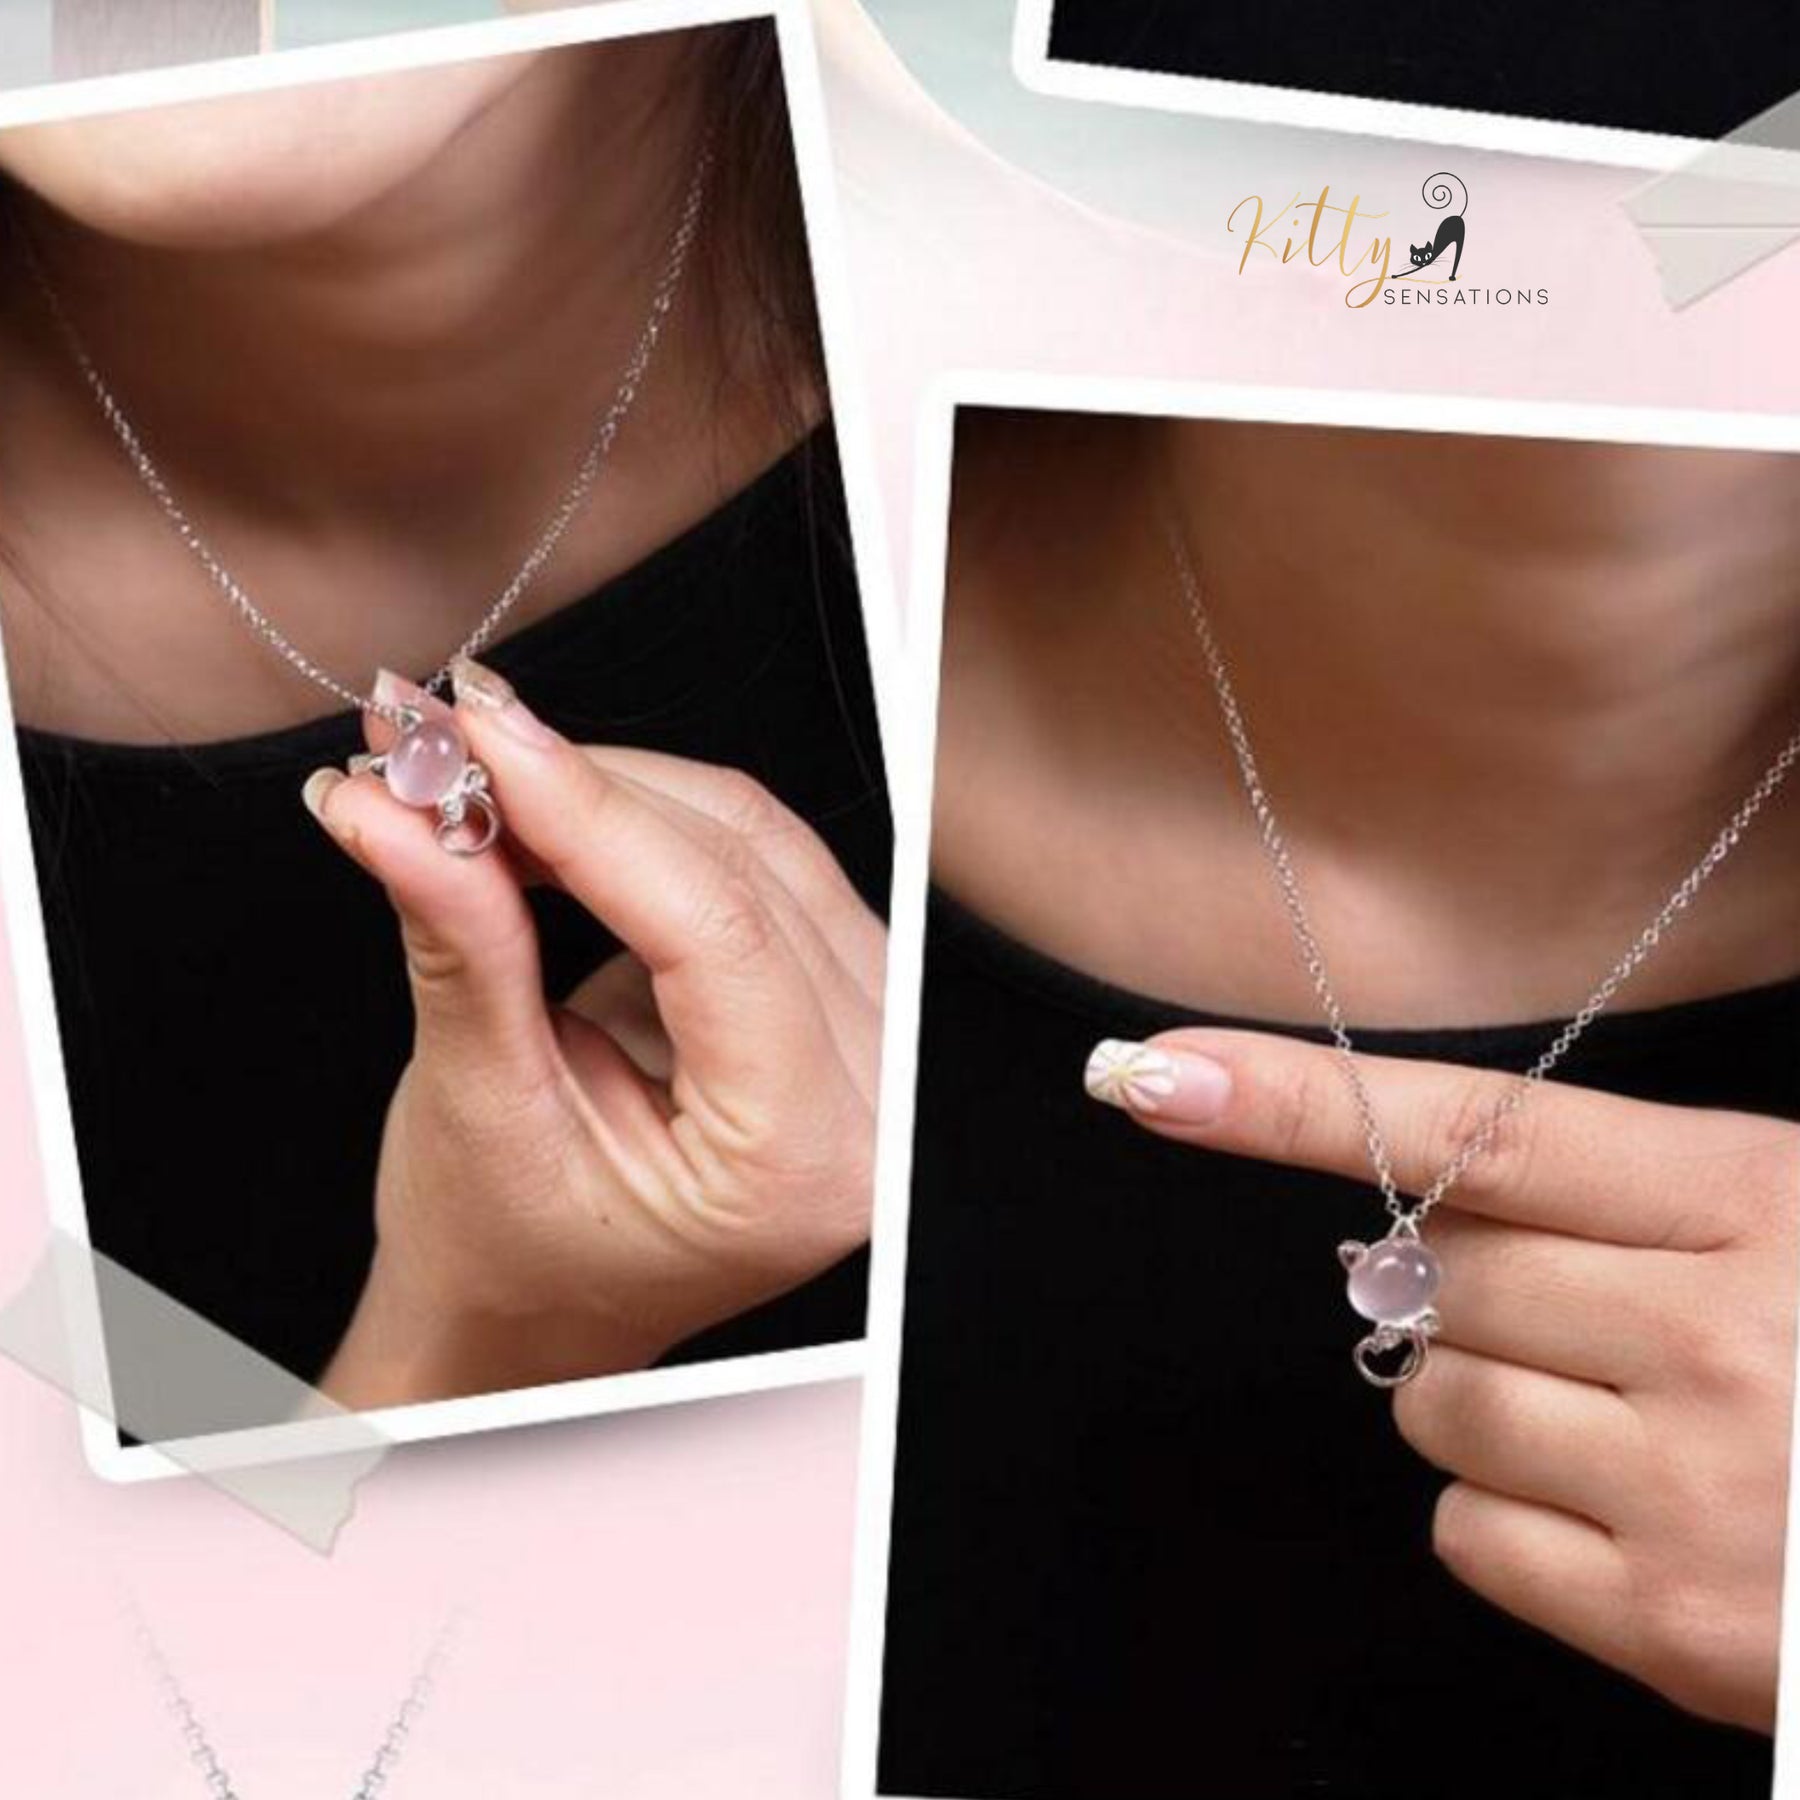 www.KittySensations.com Delicate Tea Pink Crystal Cat Pendant Necklace in Solid 925 Sterling Silver ($22.47): https://www.kittysensations.com/products/delicate-tea-pink-cat-pendant-necklace-in-solid-925-sterling-silver